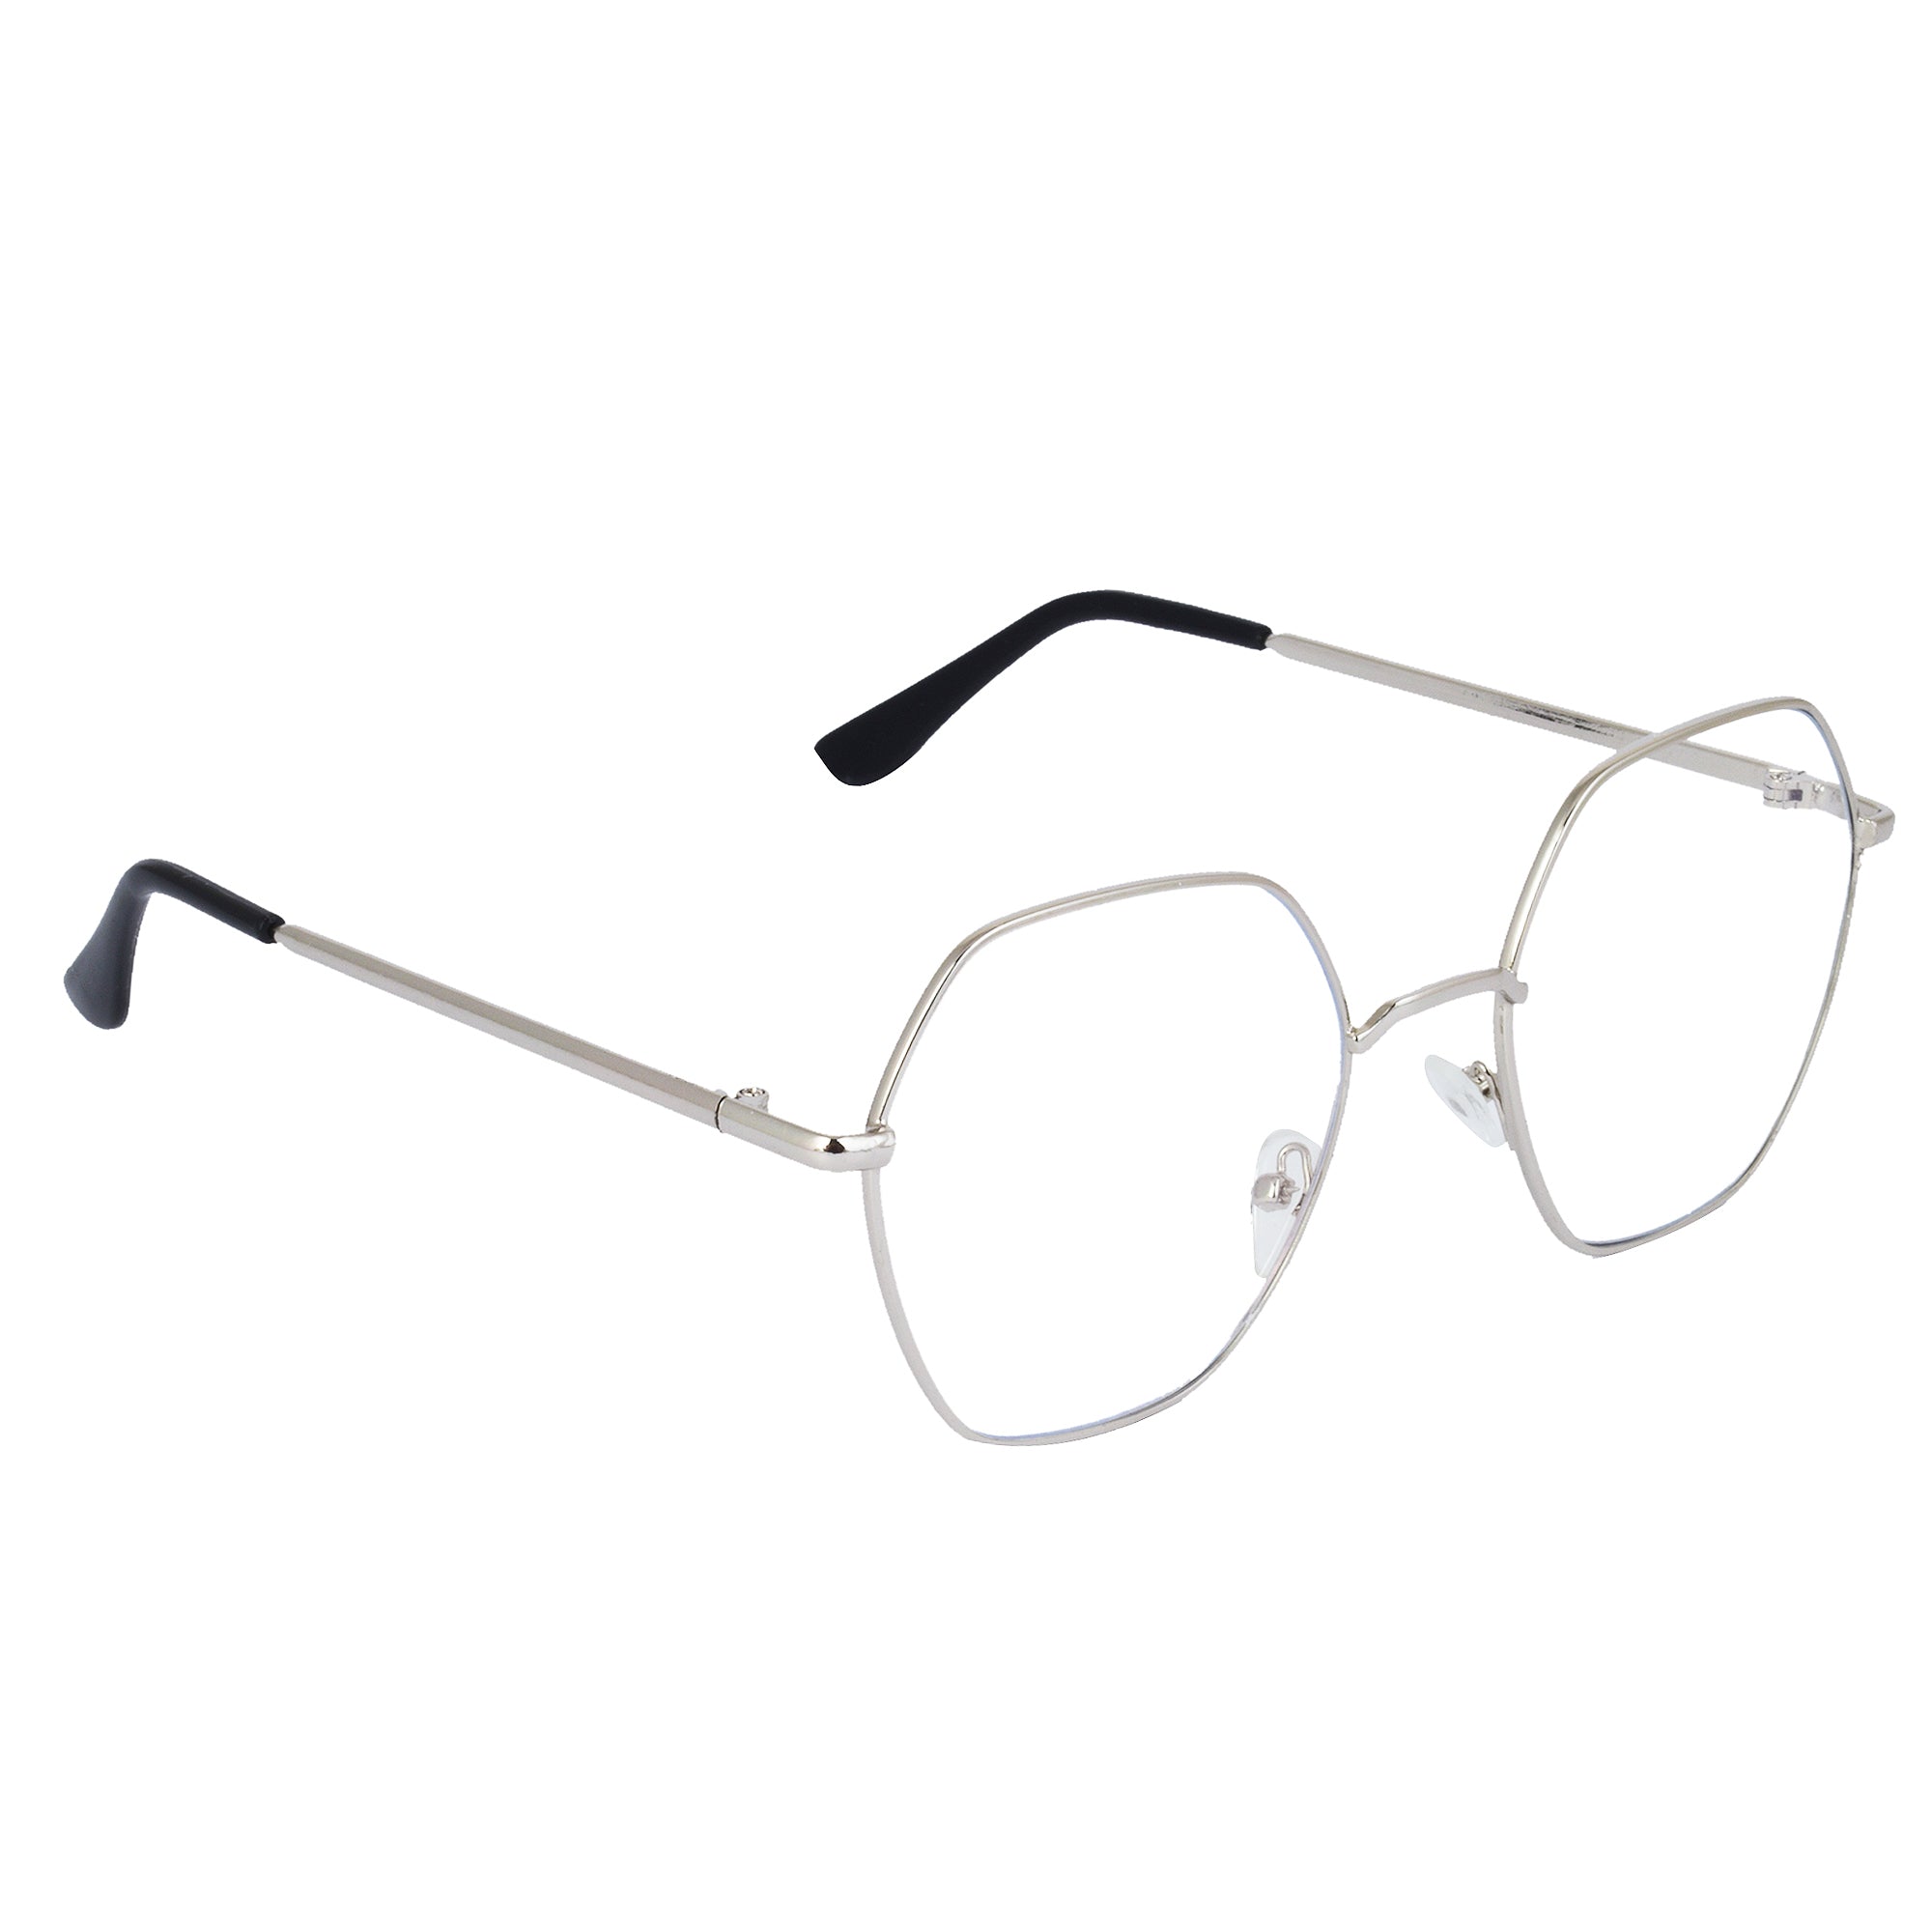 Hexagon Spectacle Frame for Men and Women - Dervin